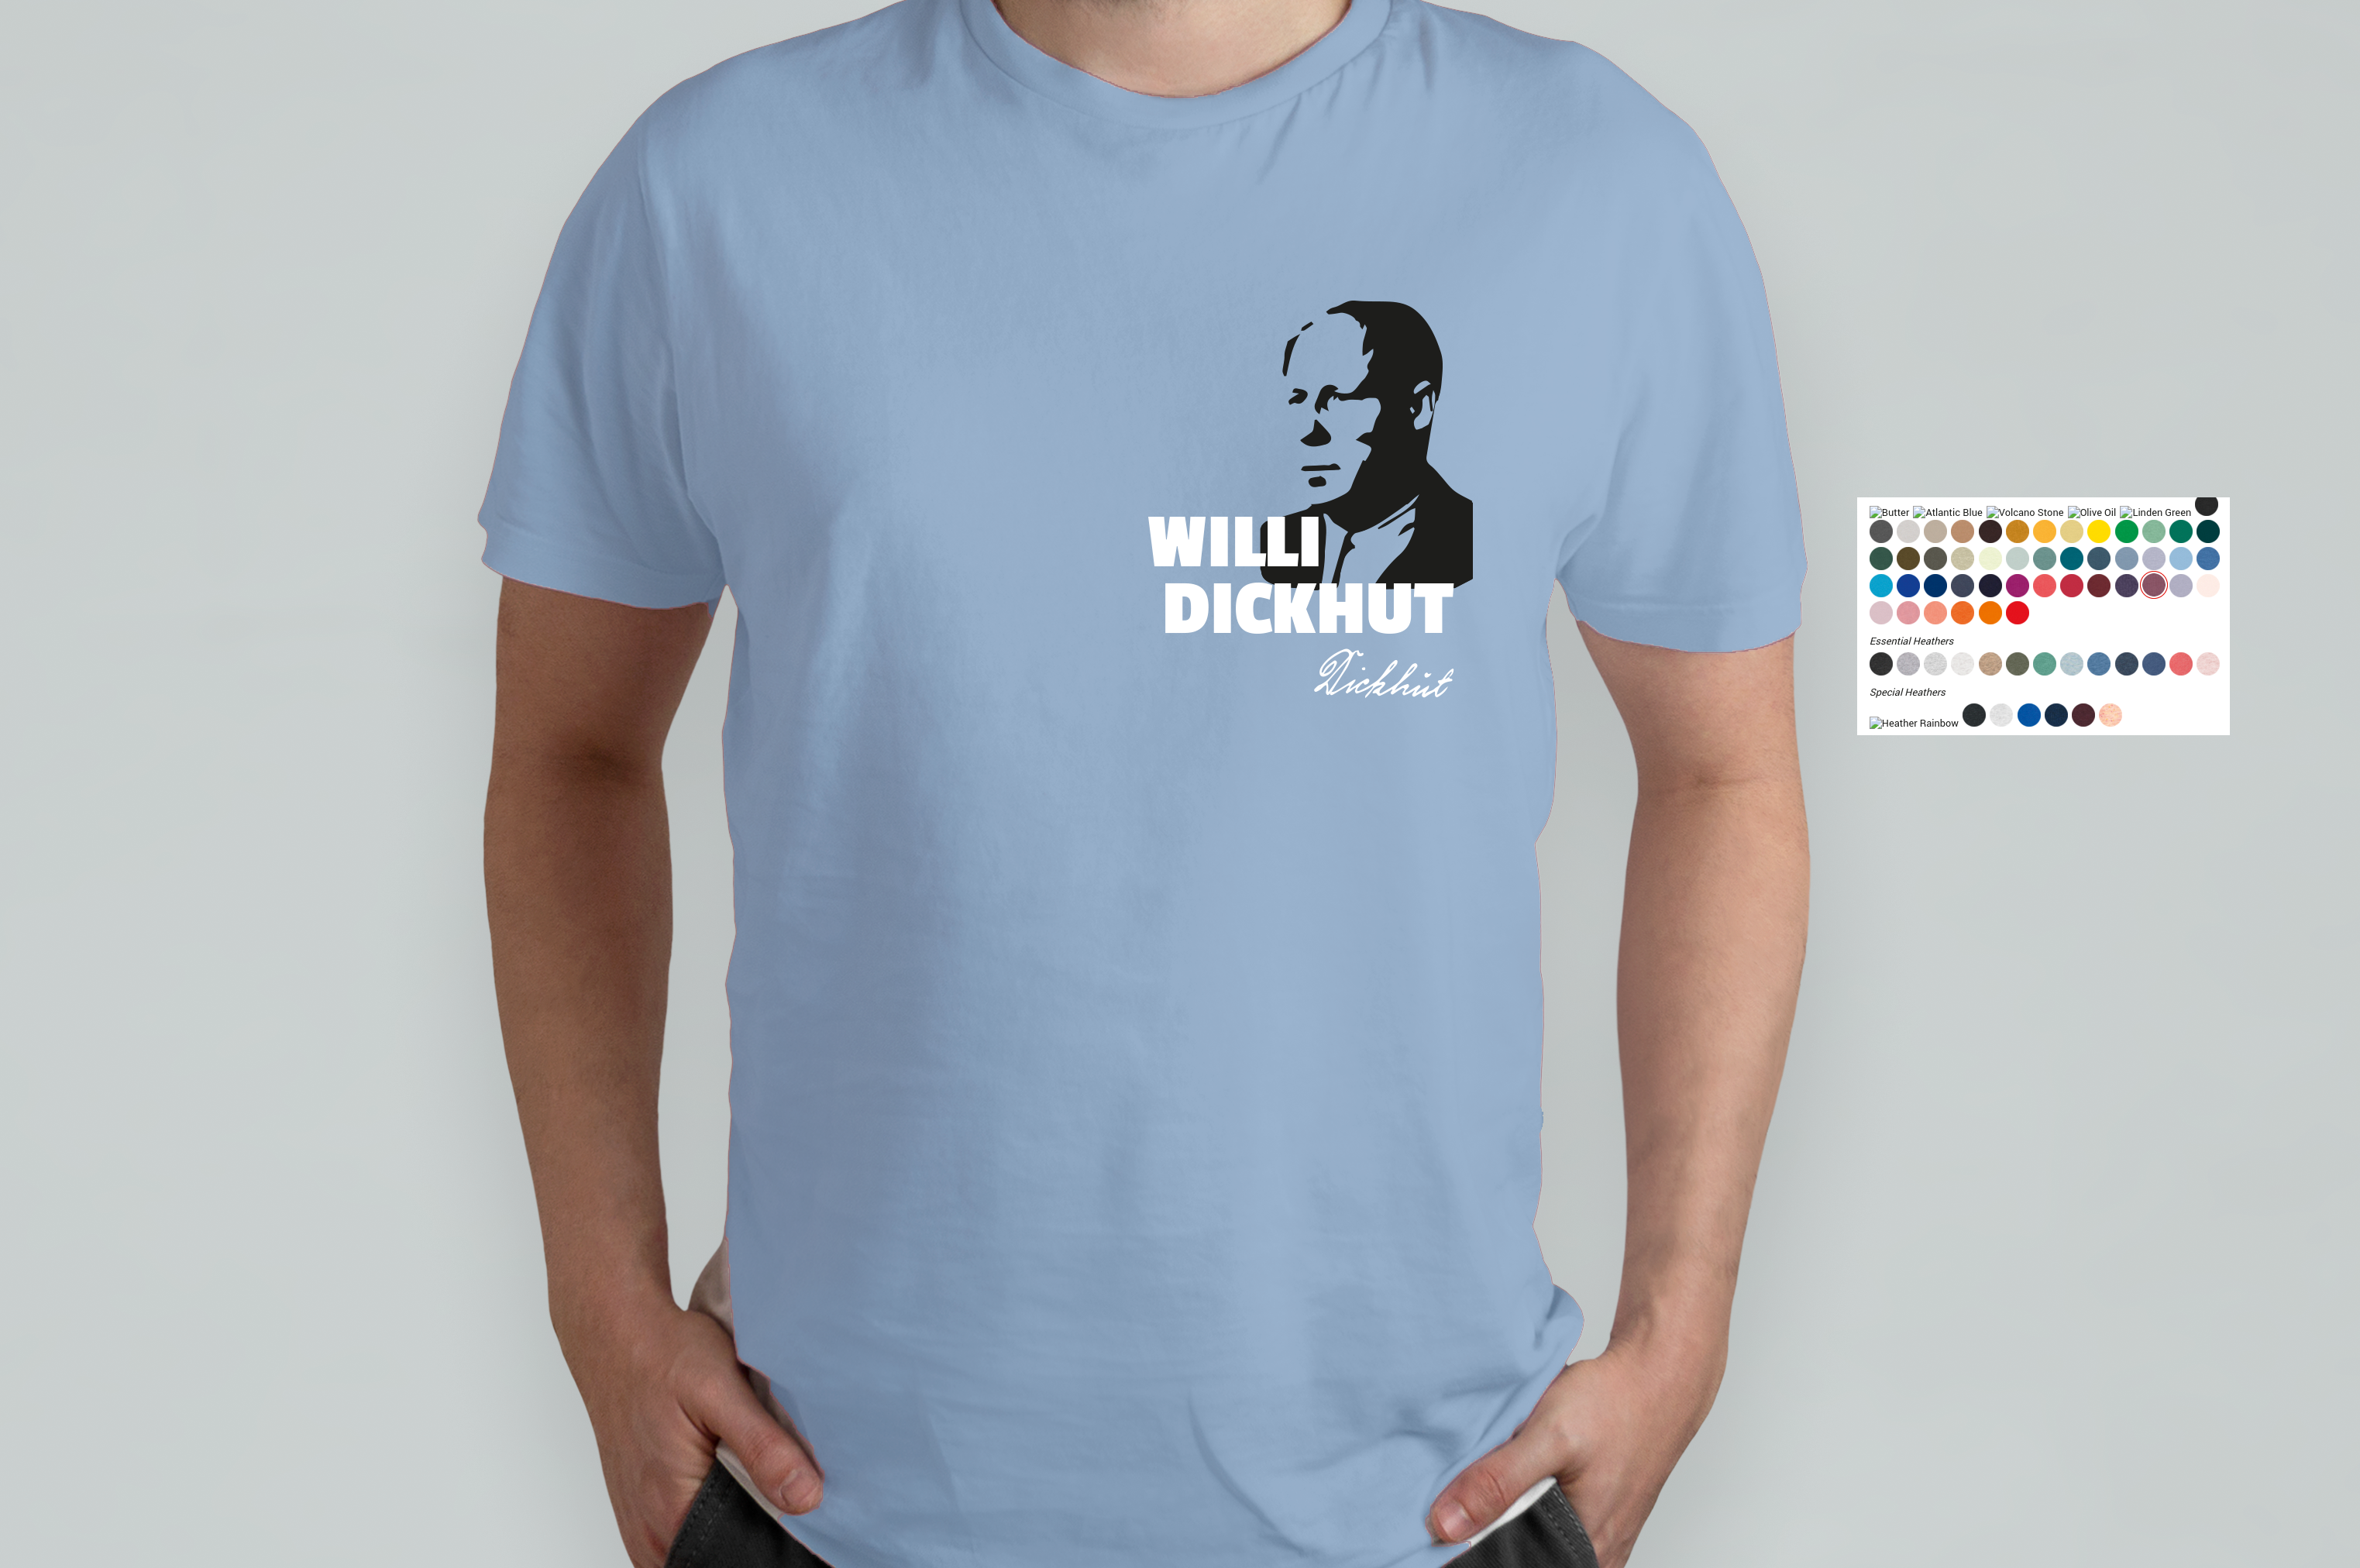 You are currently viewing Willi-Dickhut-T-Shirt ab 8. Mai erhältlich